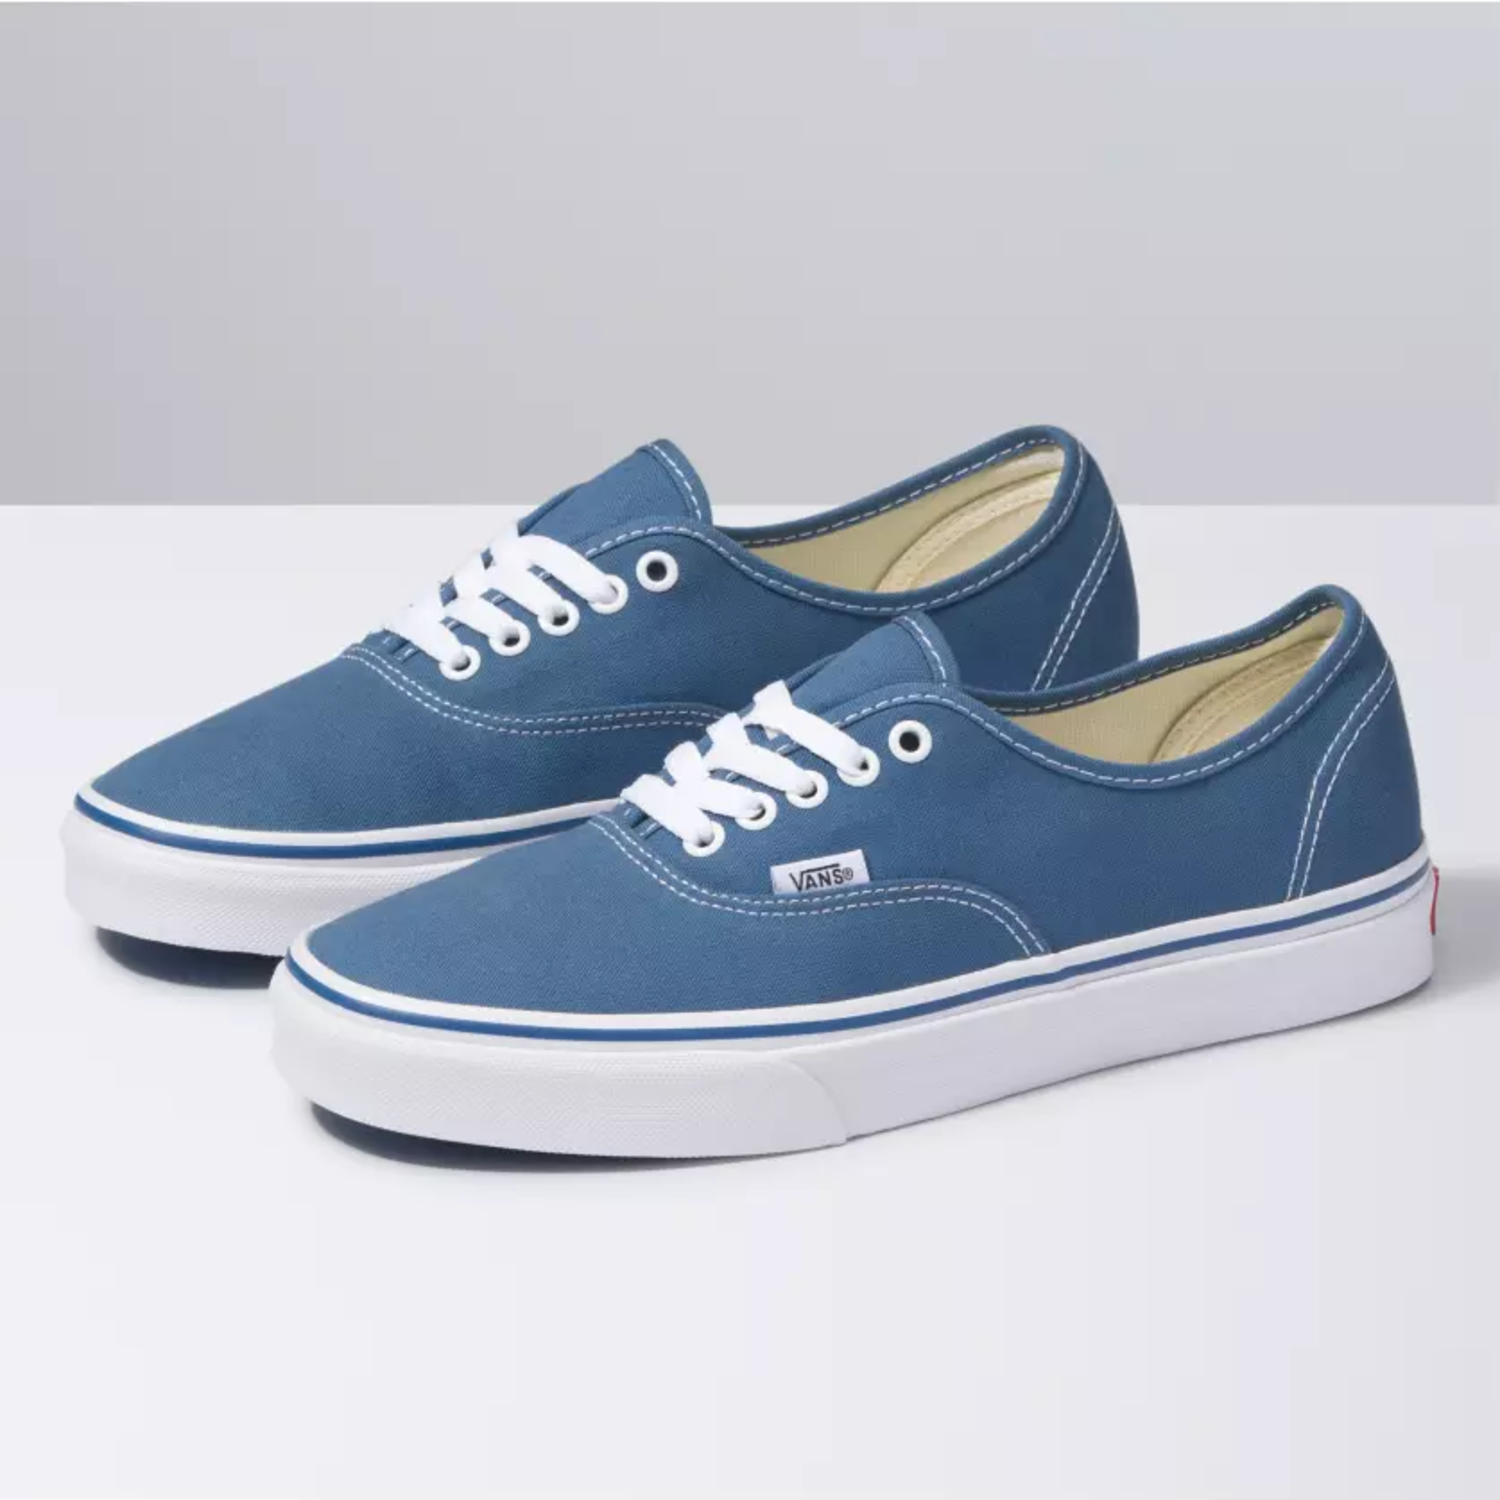 navy and blue vans